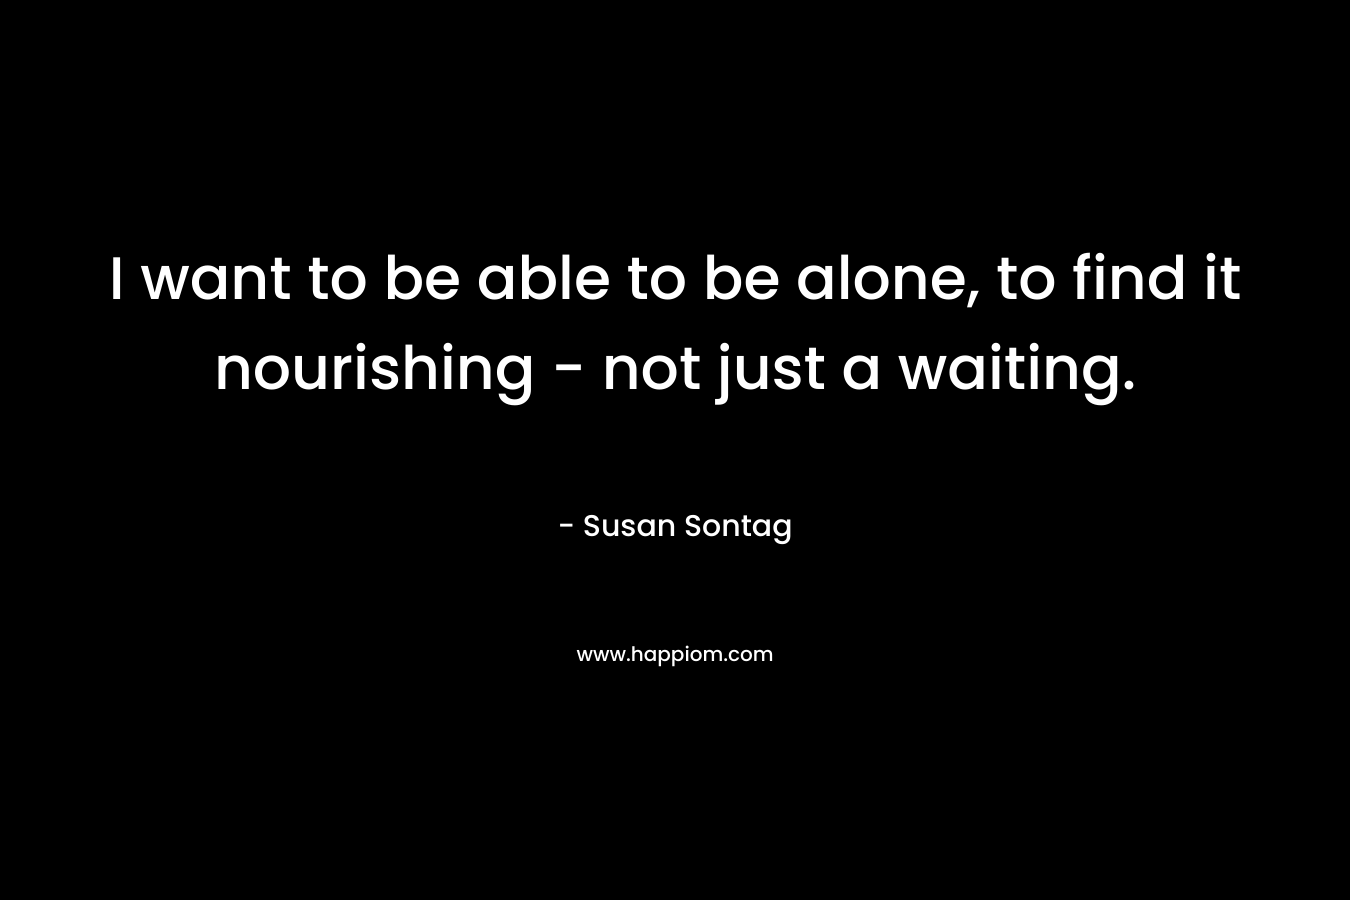 I want to be able to be alone, to find it nourishing – not just a waiting. – Susan Sontag